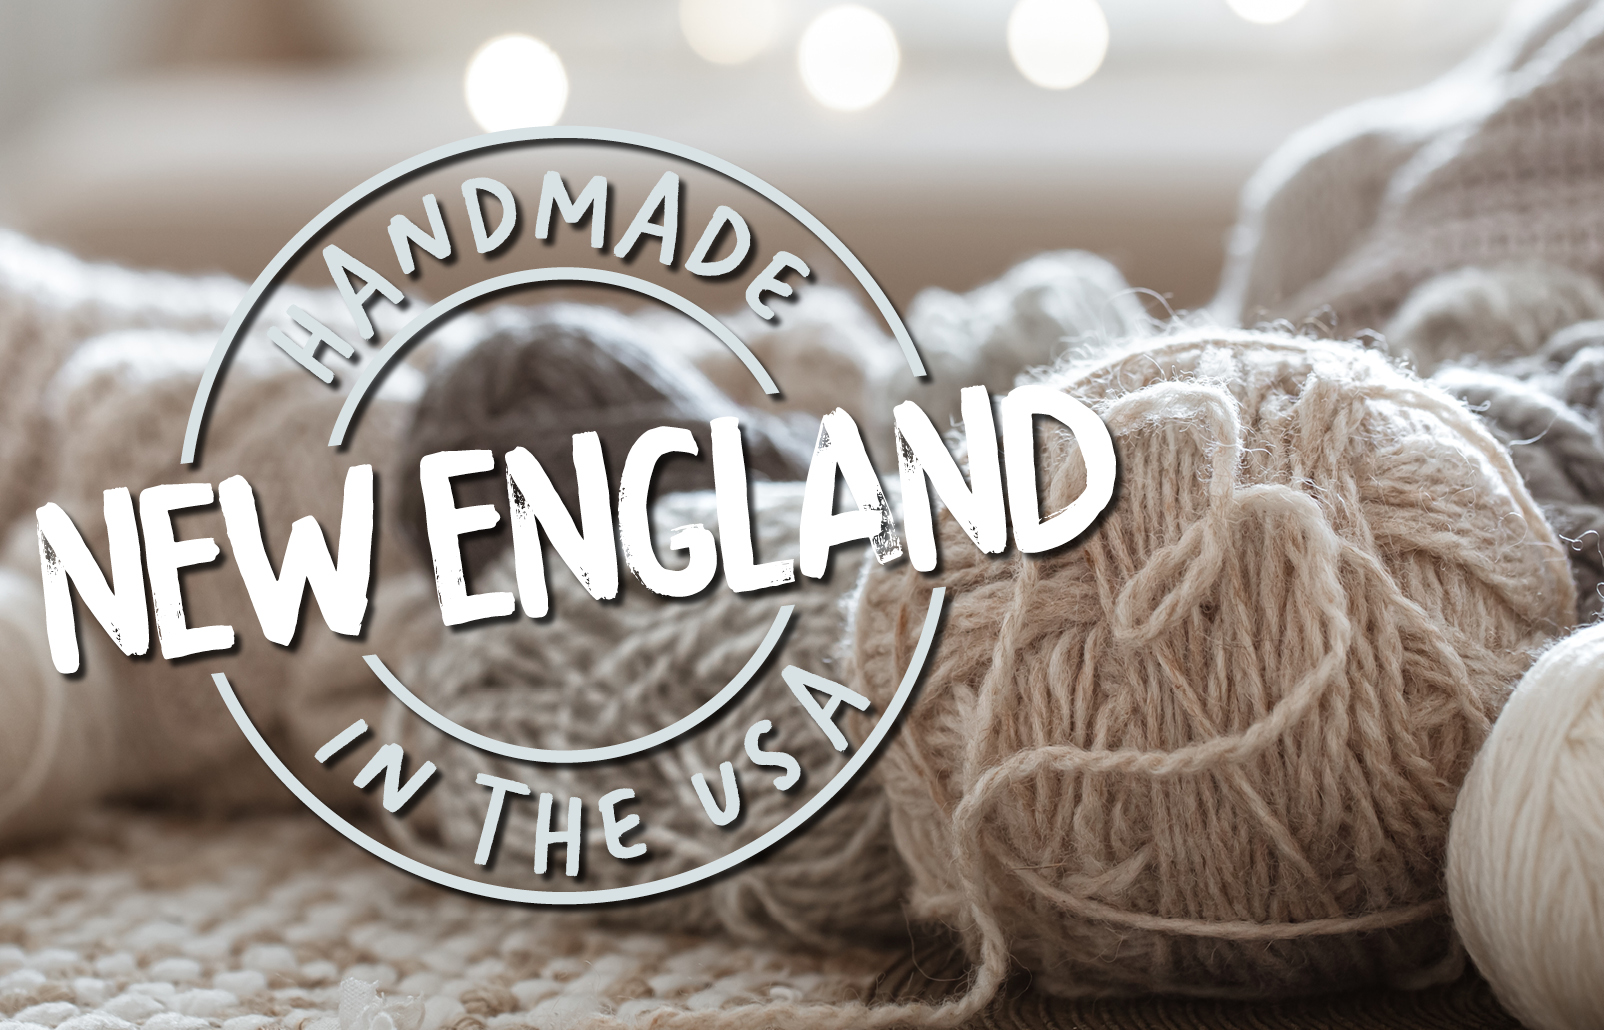 Shop Local: Handmade in New England